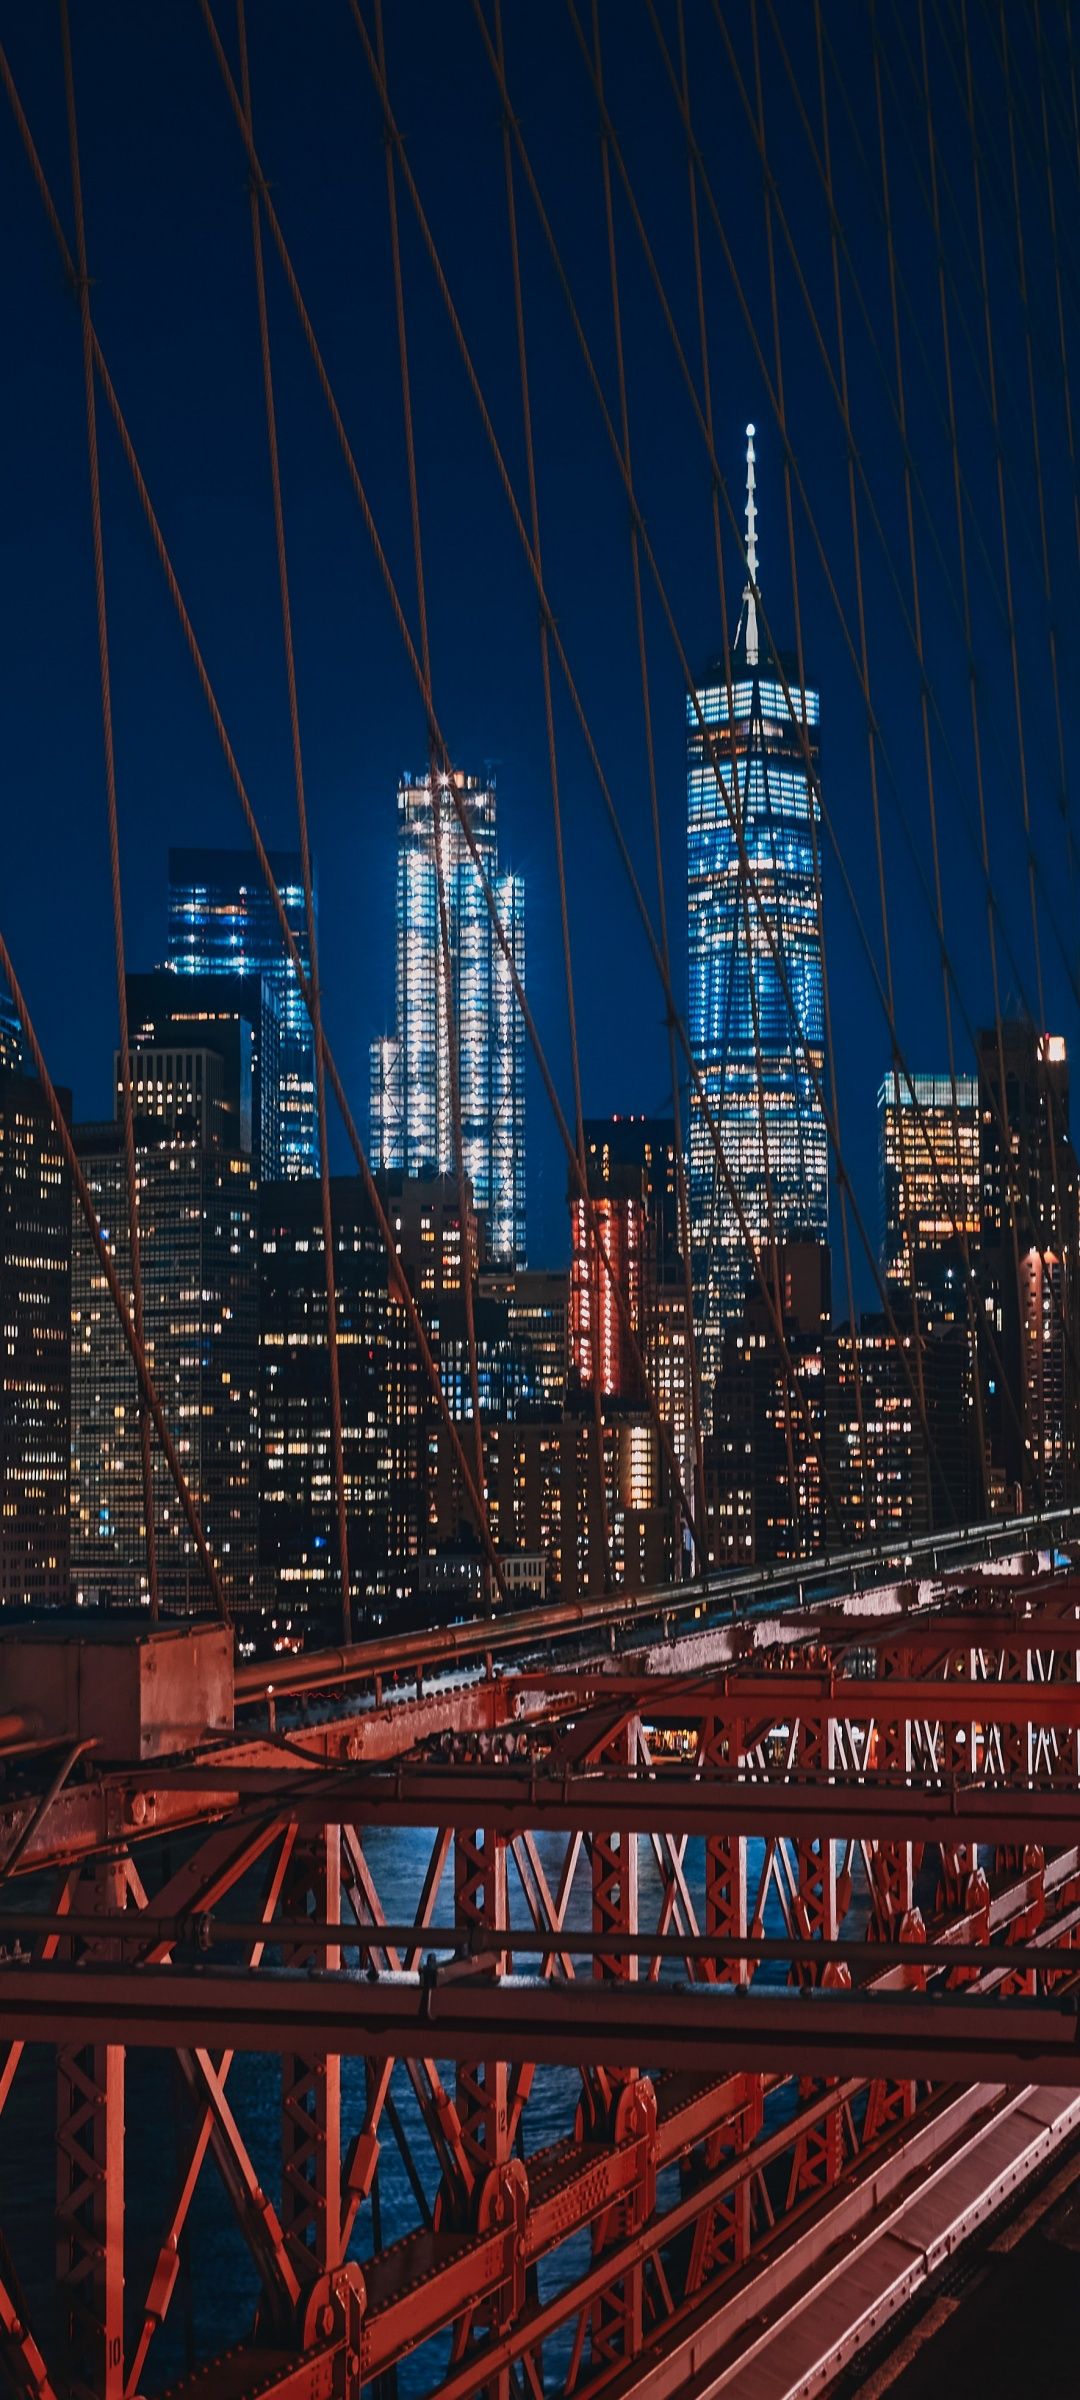 A photo of the Brooklyn Bridge with the city lights of Manhattan in the background - New York